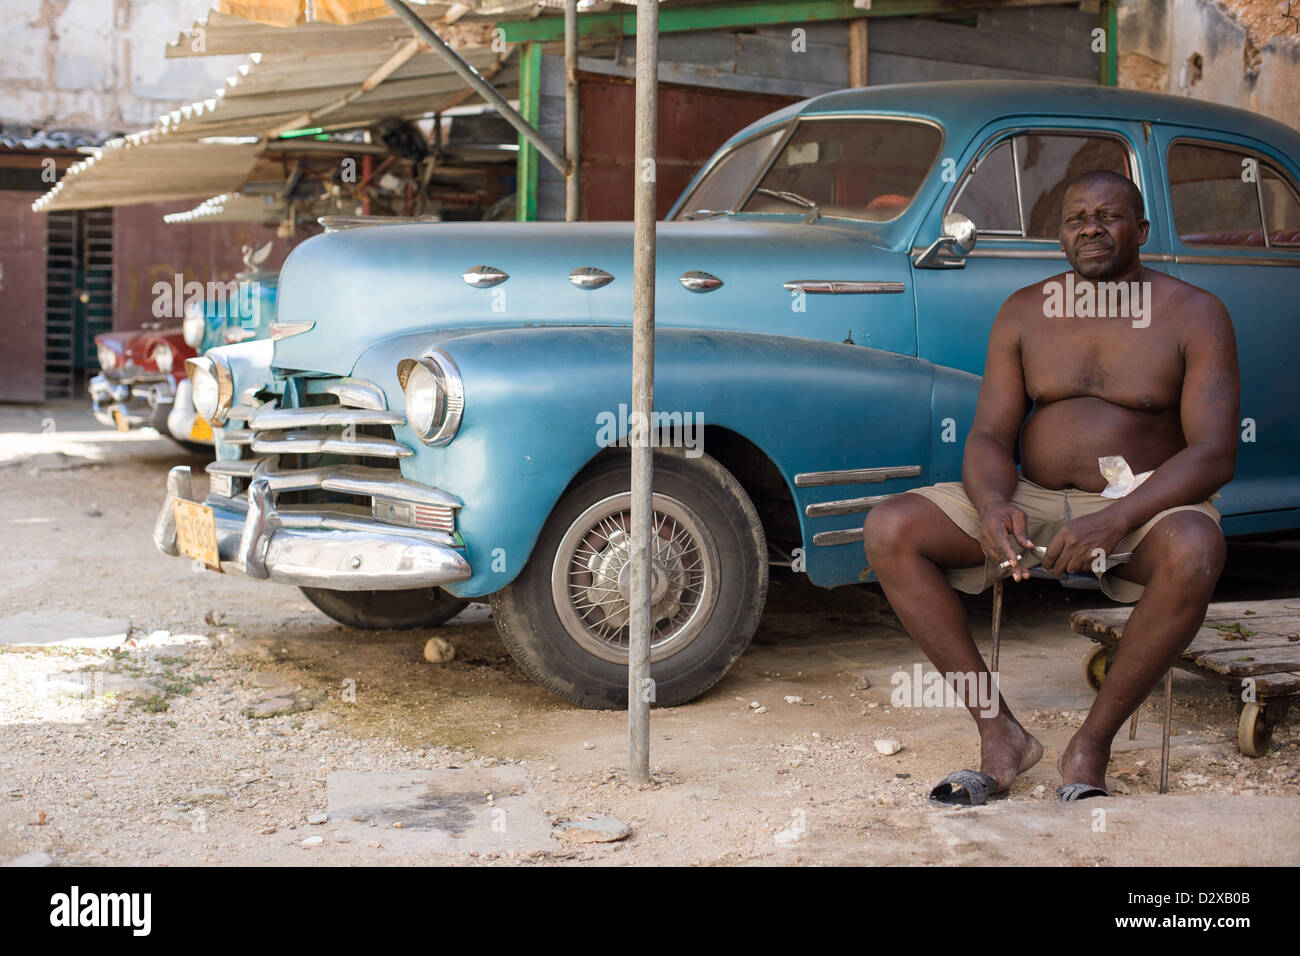 A man sitting next to an old American car in Havana, Cuba Stock Photo